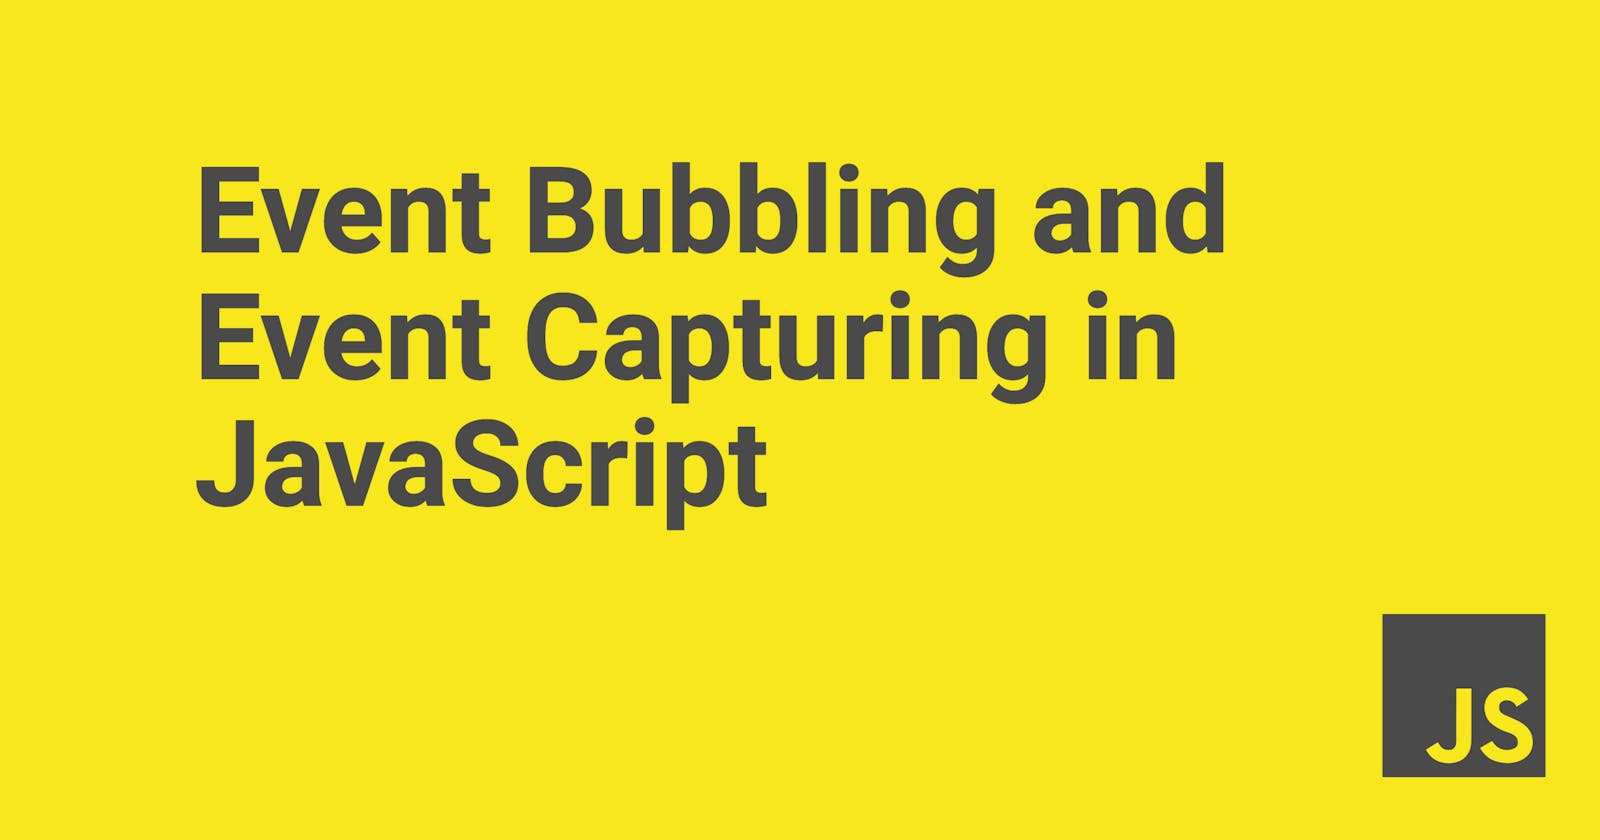 Event Bubbling and Event Capturing in JavaScript